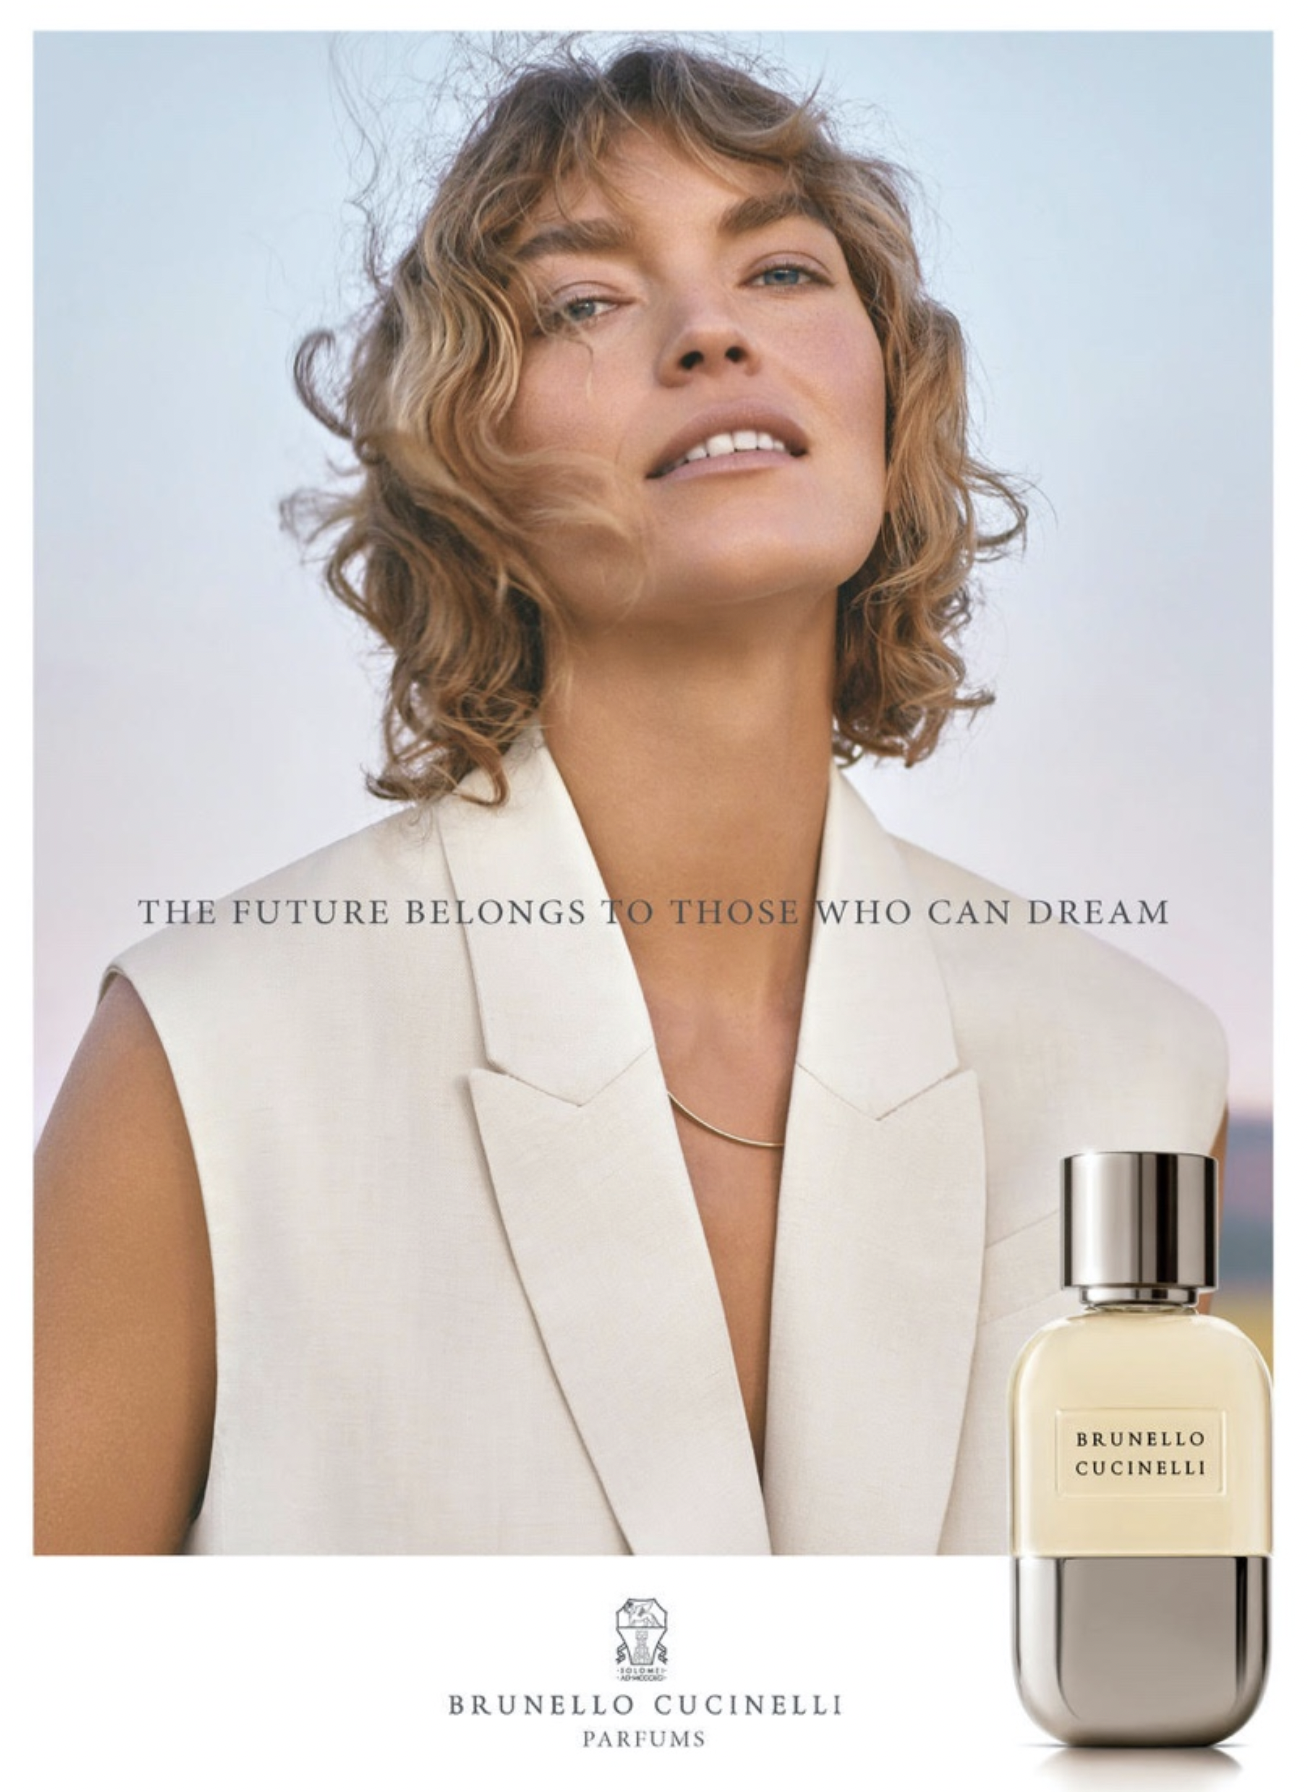 Brunello-Cucinelli-Parfums-by-Hunter-and-Gatti-6.png